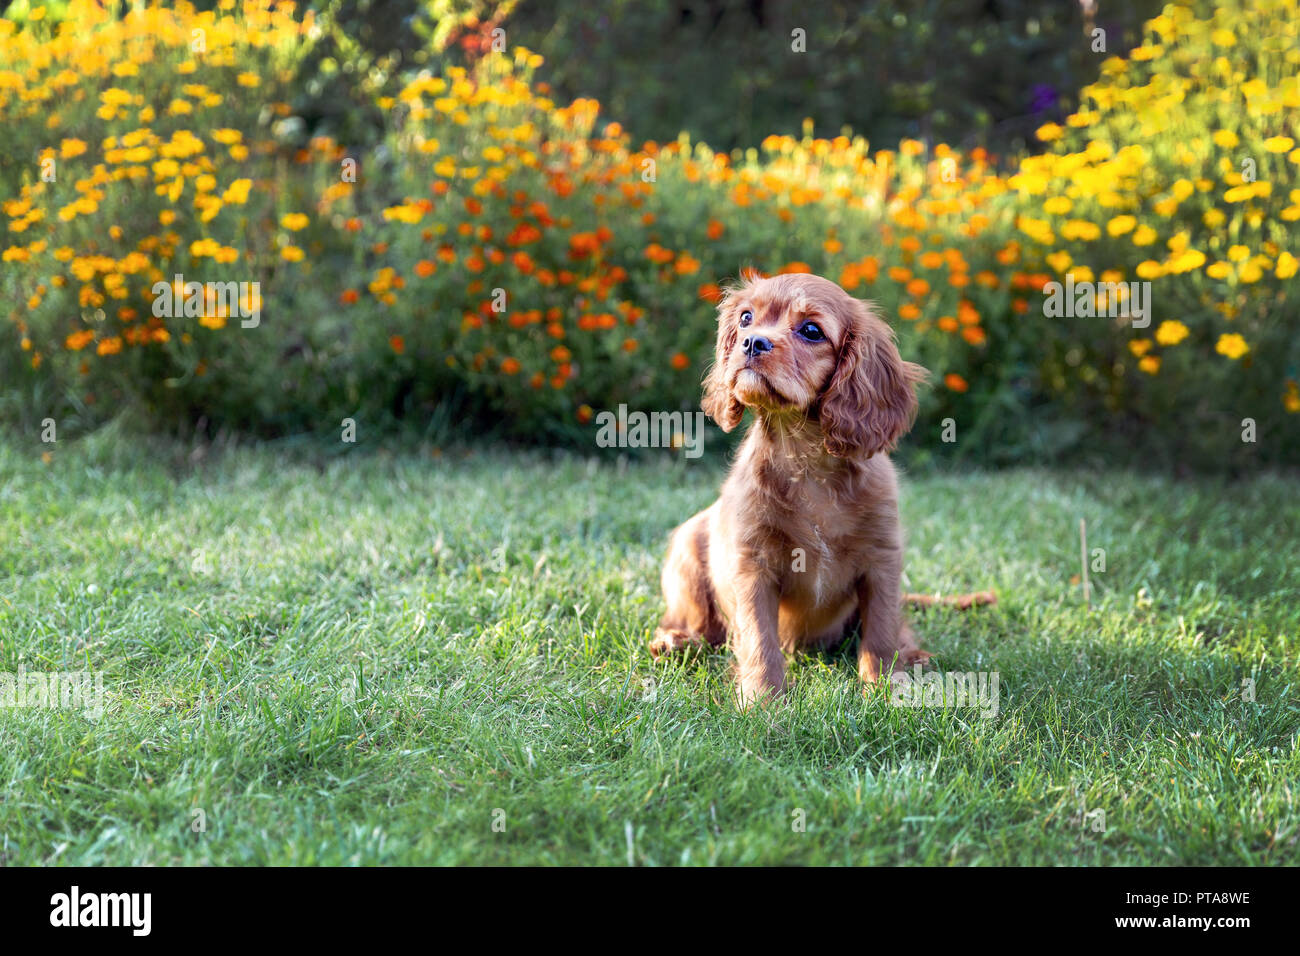 Adorable puppy sitting on the green grass in the garden Stock Photo